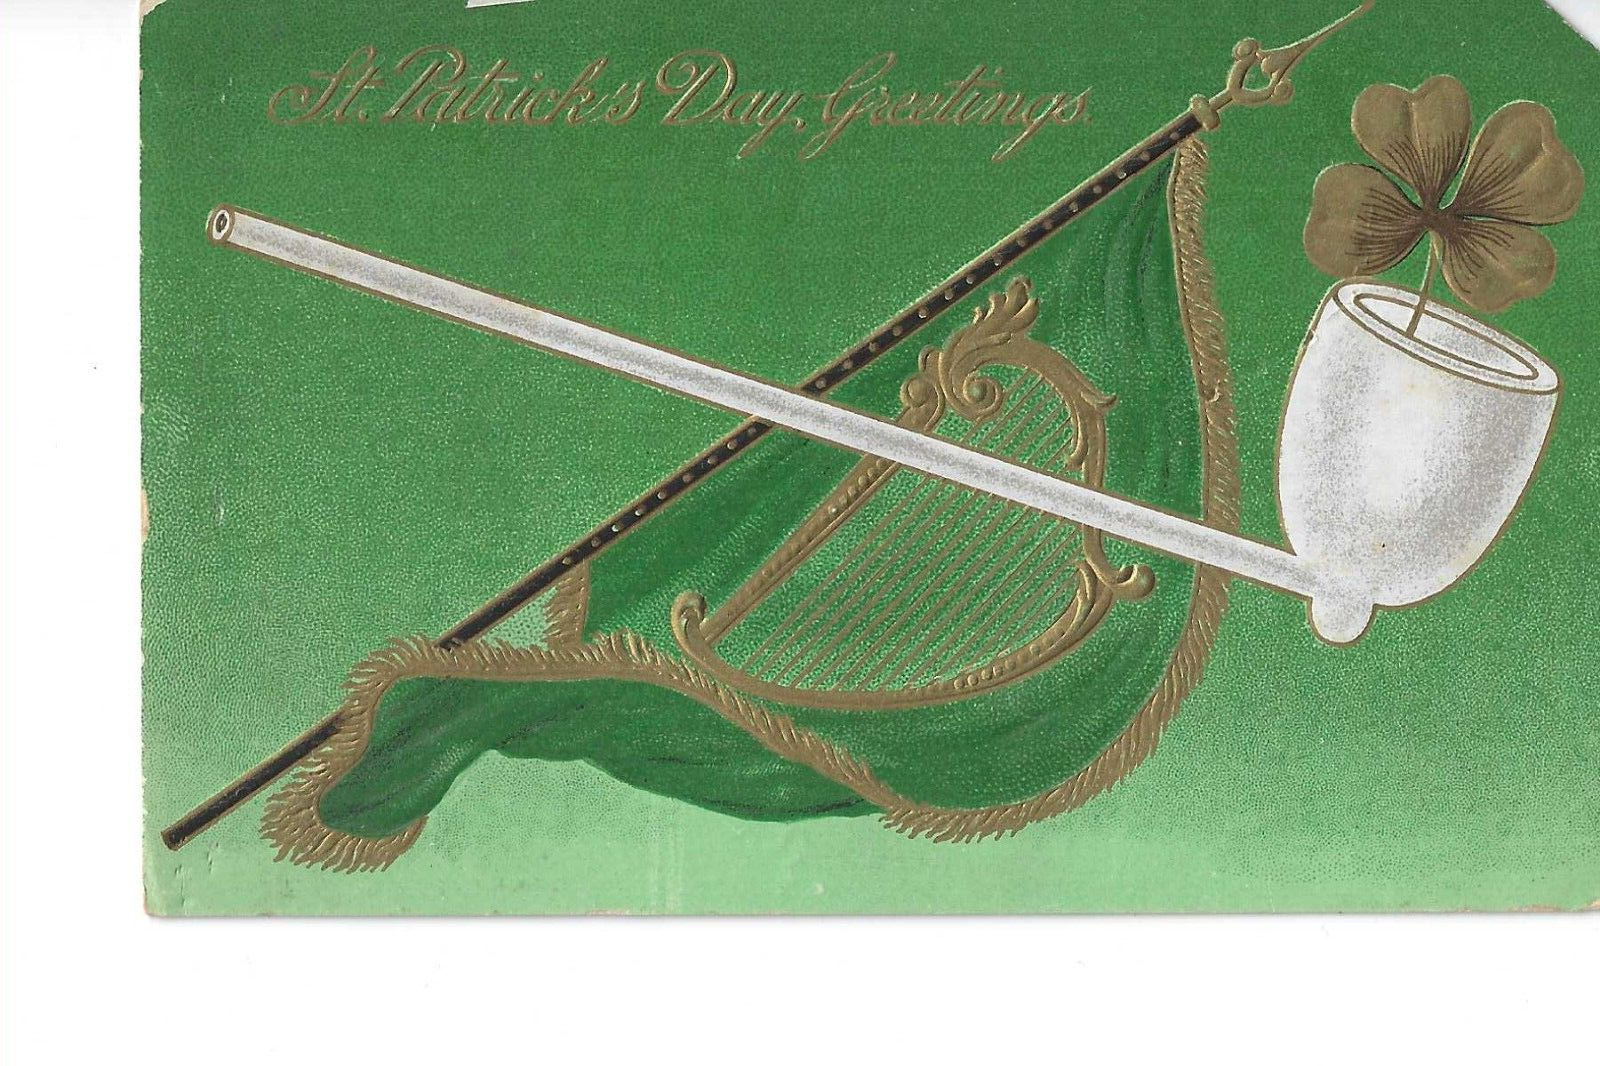 VINTAGE POSTCARD EMBOSSED ST. PATRICK\'S DAY GREETINGS, PIPE AND 4 LEAF CLOVER